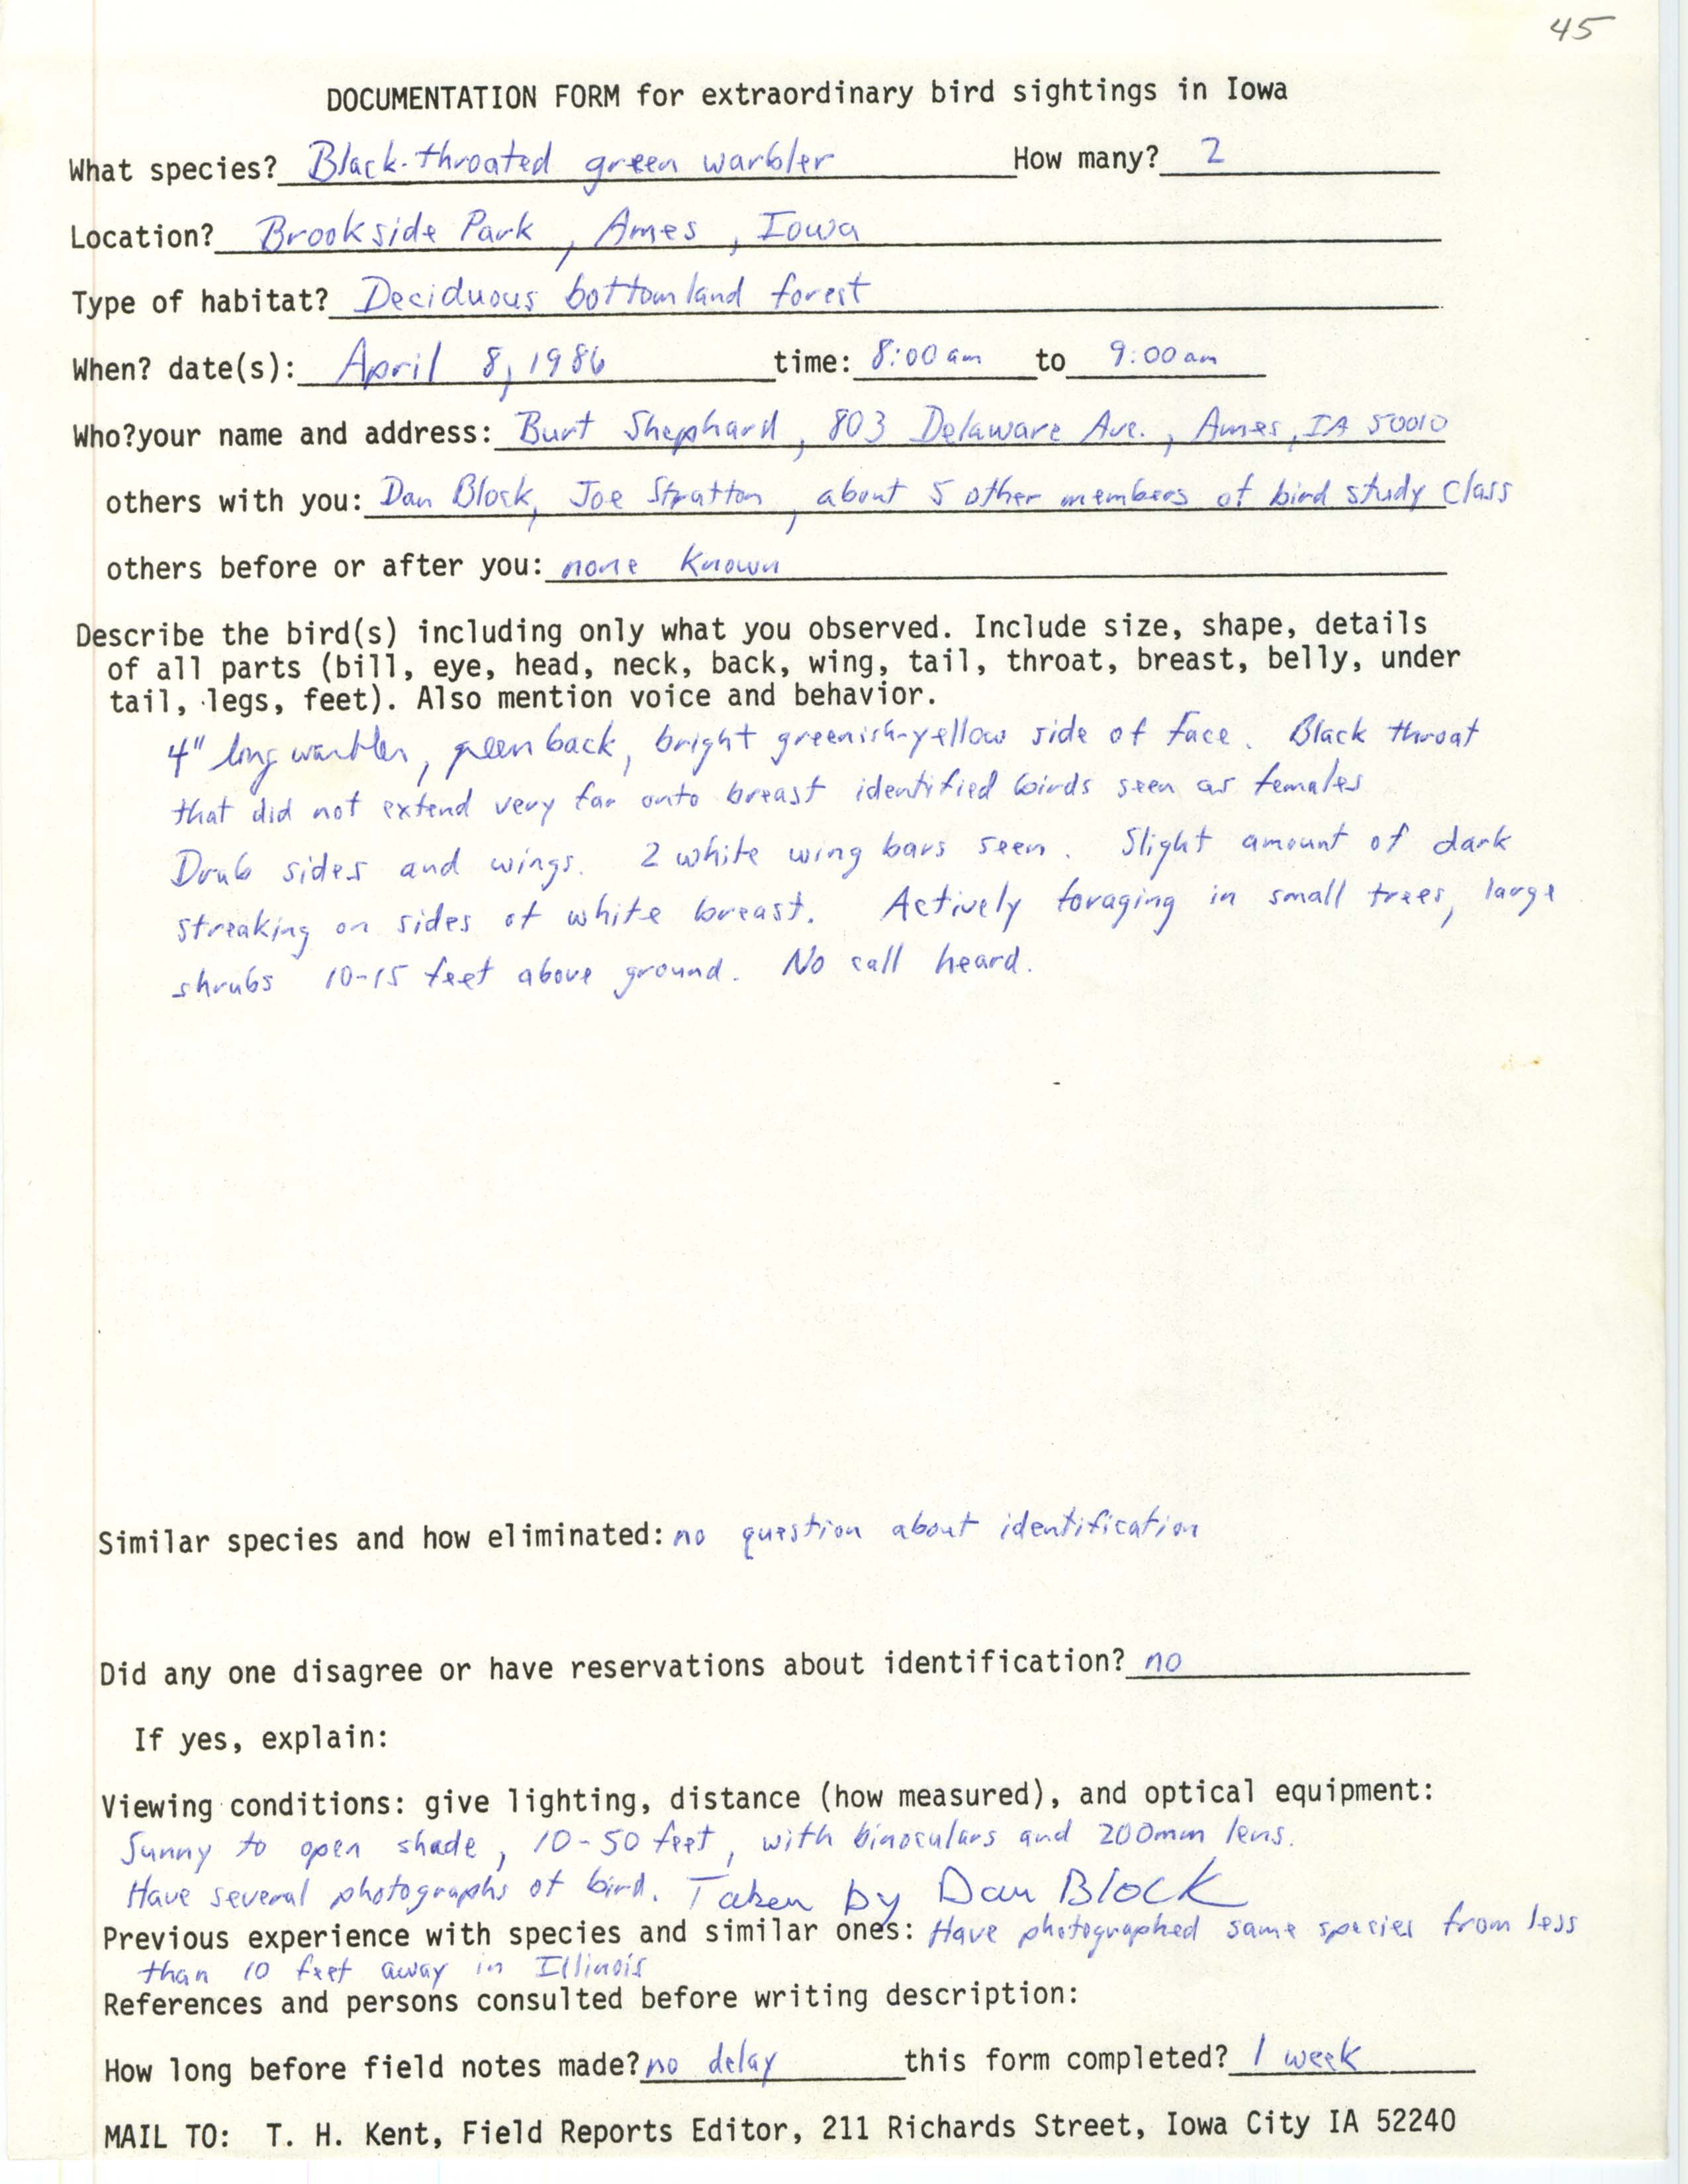 Rare bird documentation form for Black-throated Green Warbler at Brookside Park in Ames, 1986